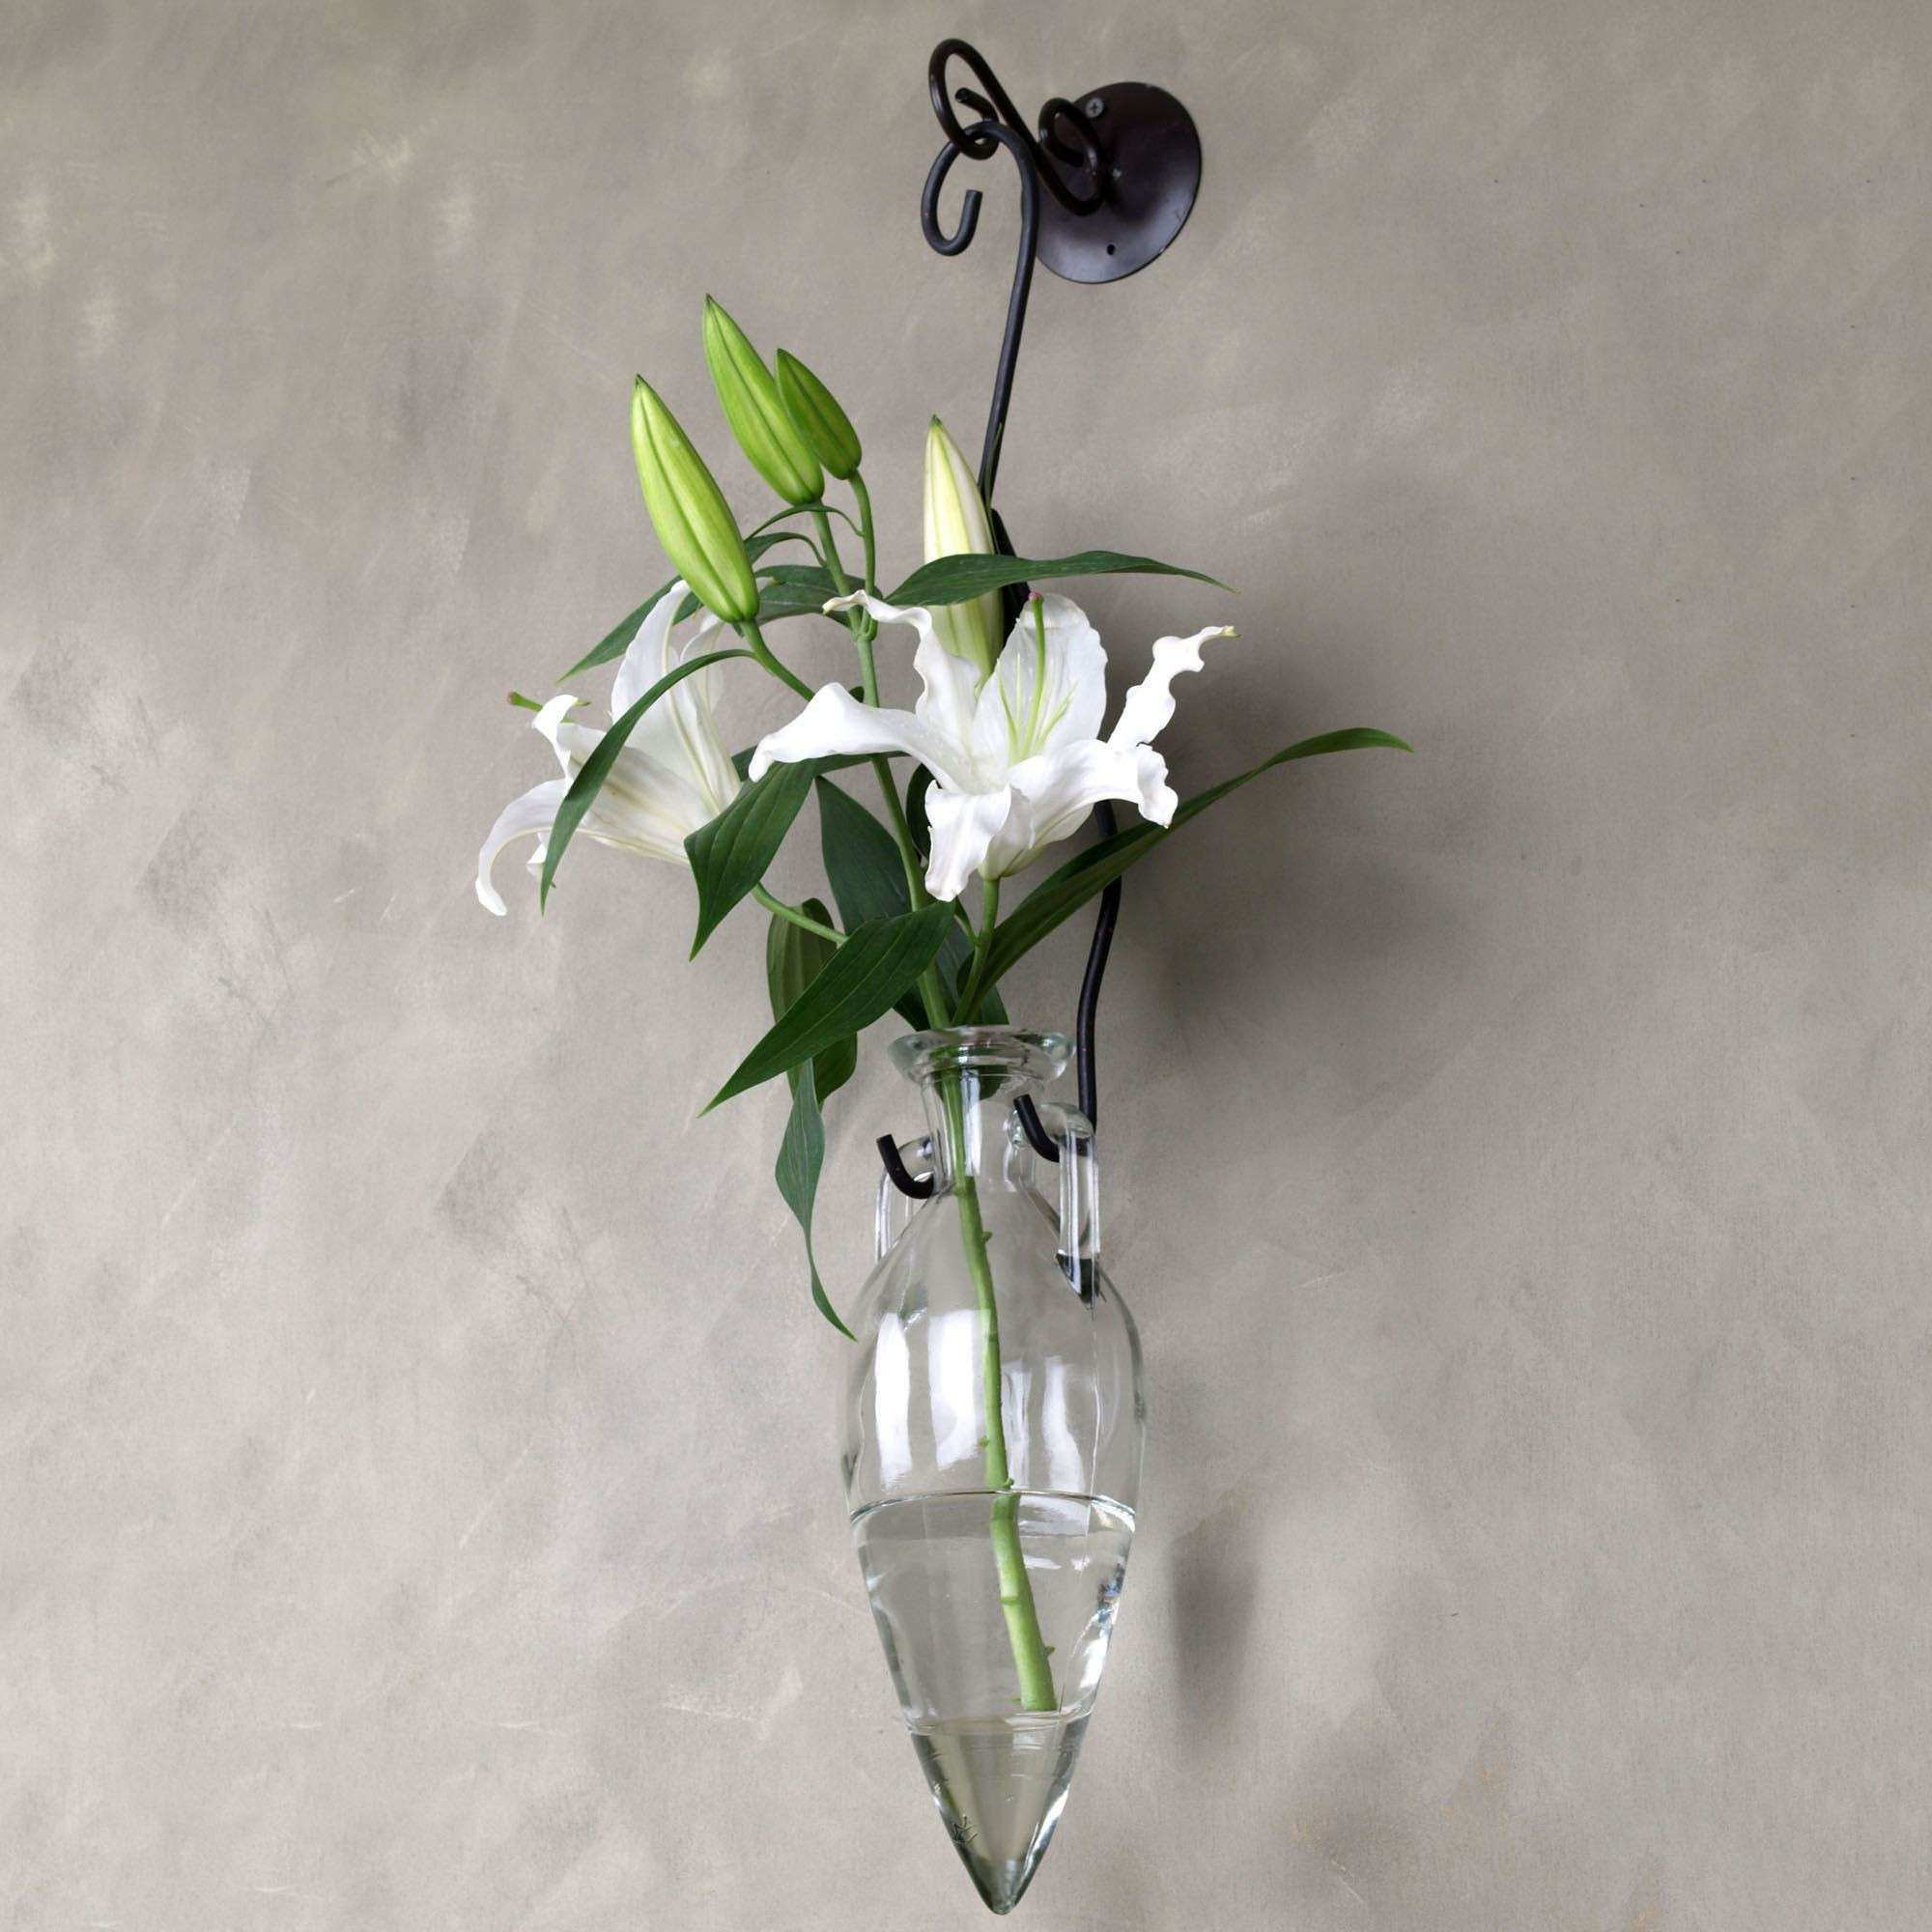 21 Recommended Glass Vase Centerpiece Ideas 2024 free download glass vase centerpiece ideas of flower garden decorations new h vases wall hanging flower vase regarding flower garden decorations new h vases wall hanging flower vase newspaper i 0d scheme 